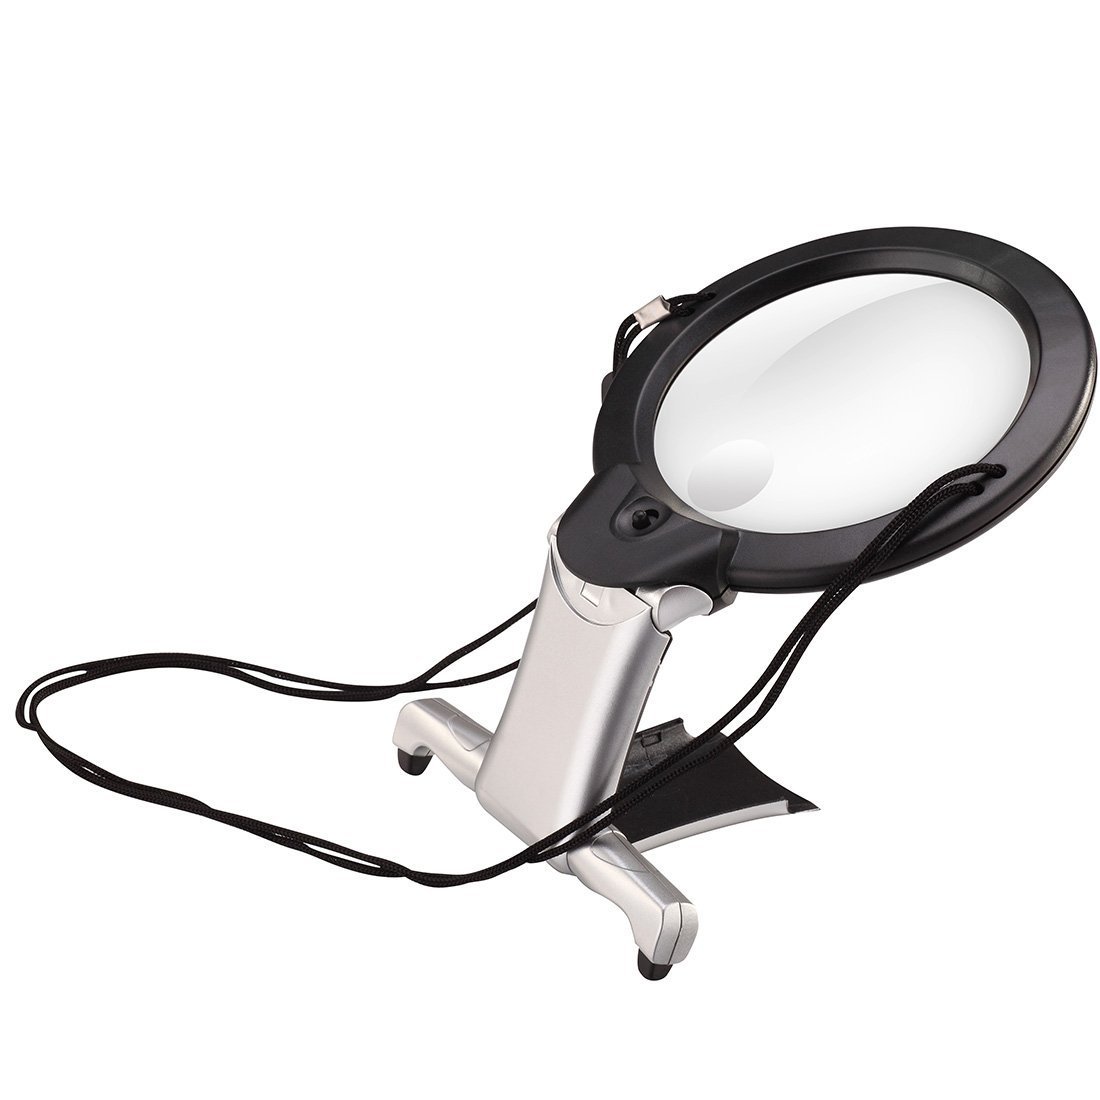 Reading Magnifier Magnifying Glass Necklace 2.5 X 6X Lighted Magnifier Glass Magnify Hands Free Handheld Large LED Magnifying Glass Illuminated Loupe Lens for for Seniors Reading,Embroidery,Jeweler